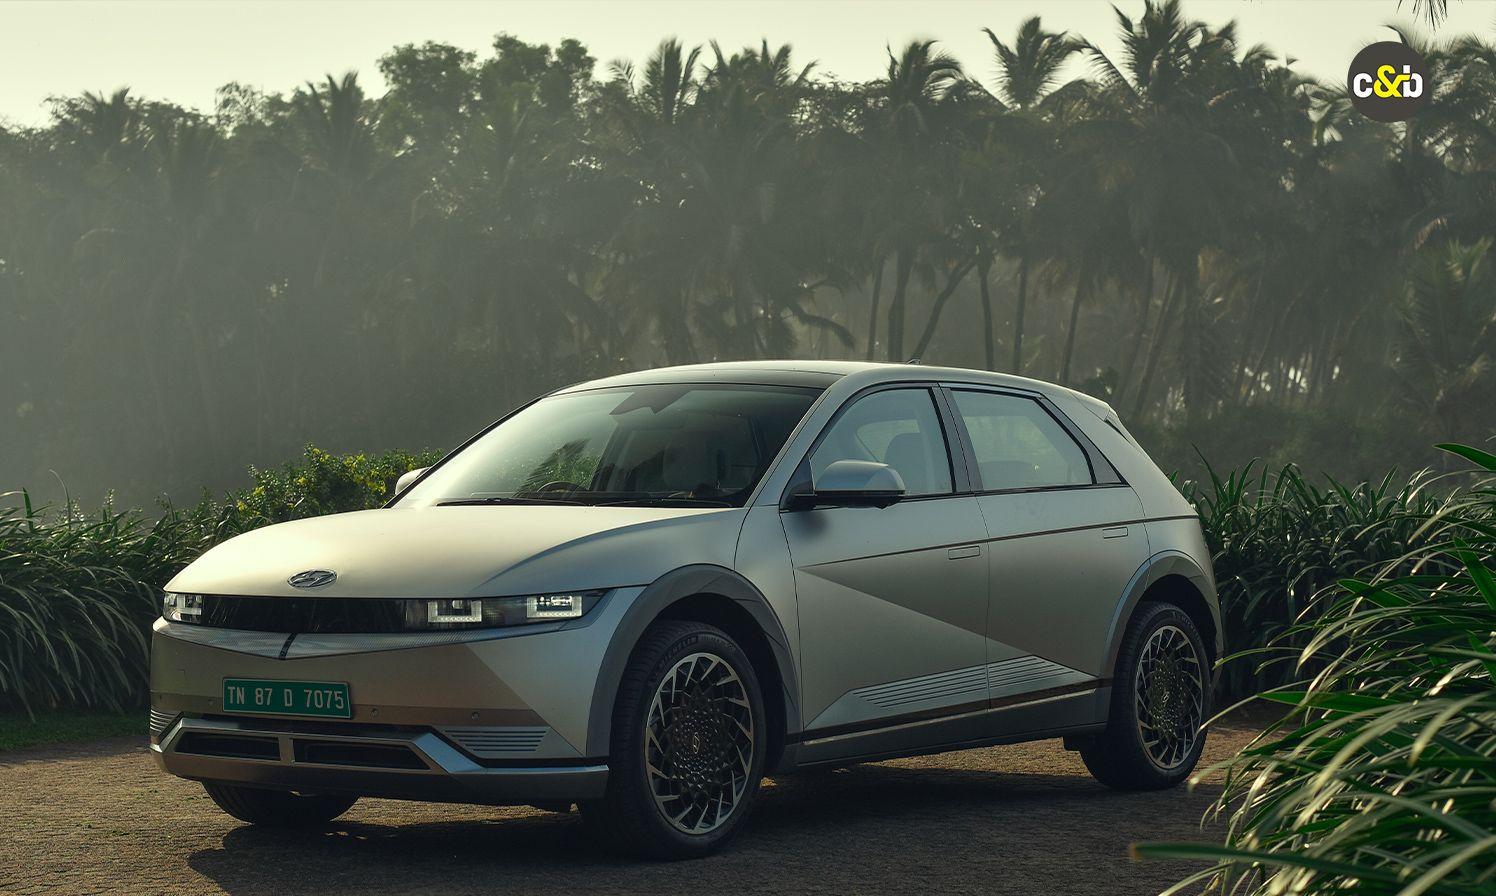 Since its inception in January 2023, the flagship EV has crossed 1000 units of sales in India.